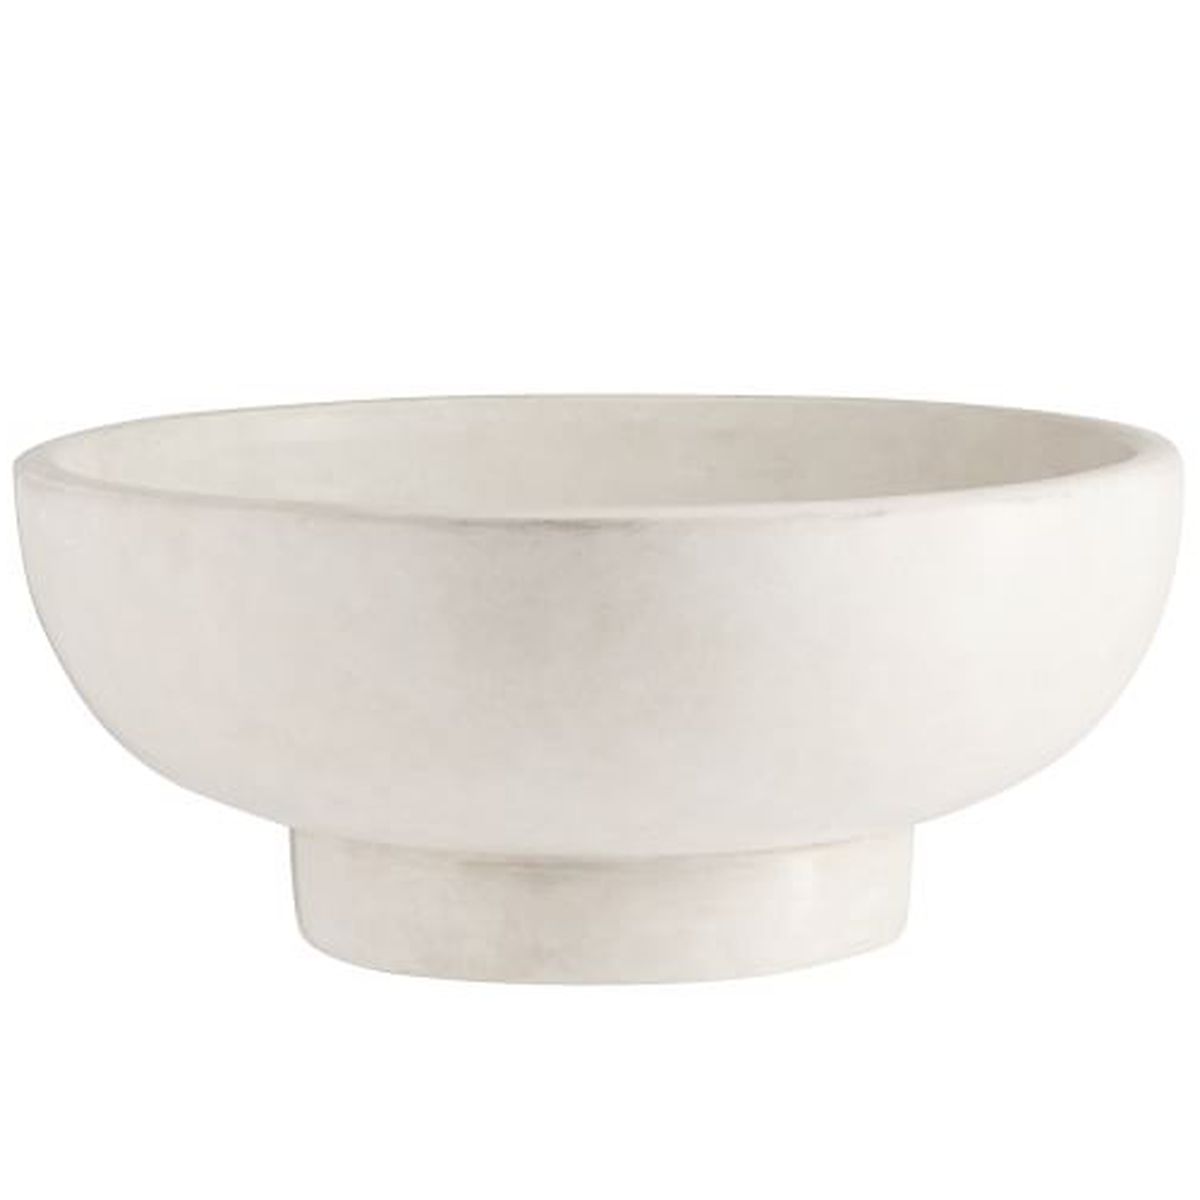 A large, all-white bowl with bottom base. 